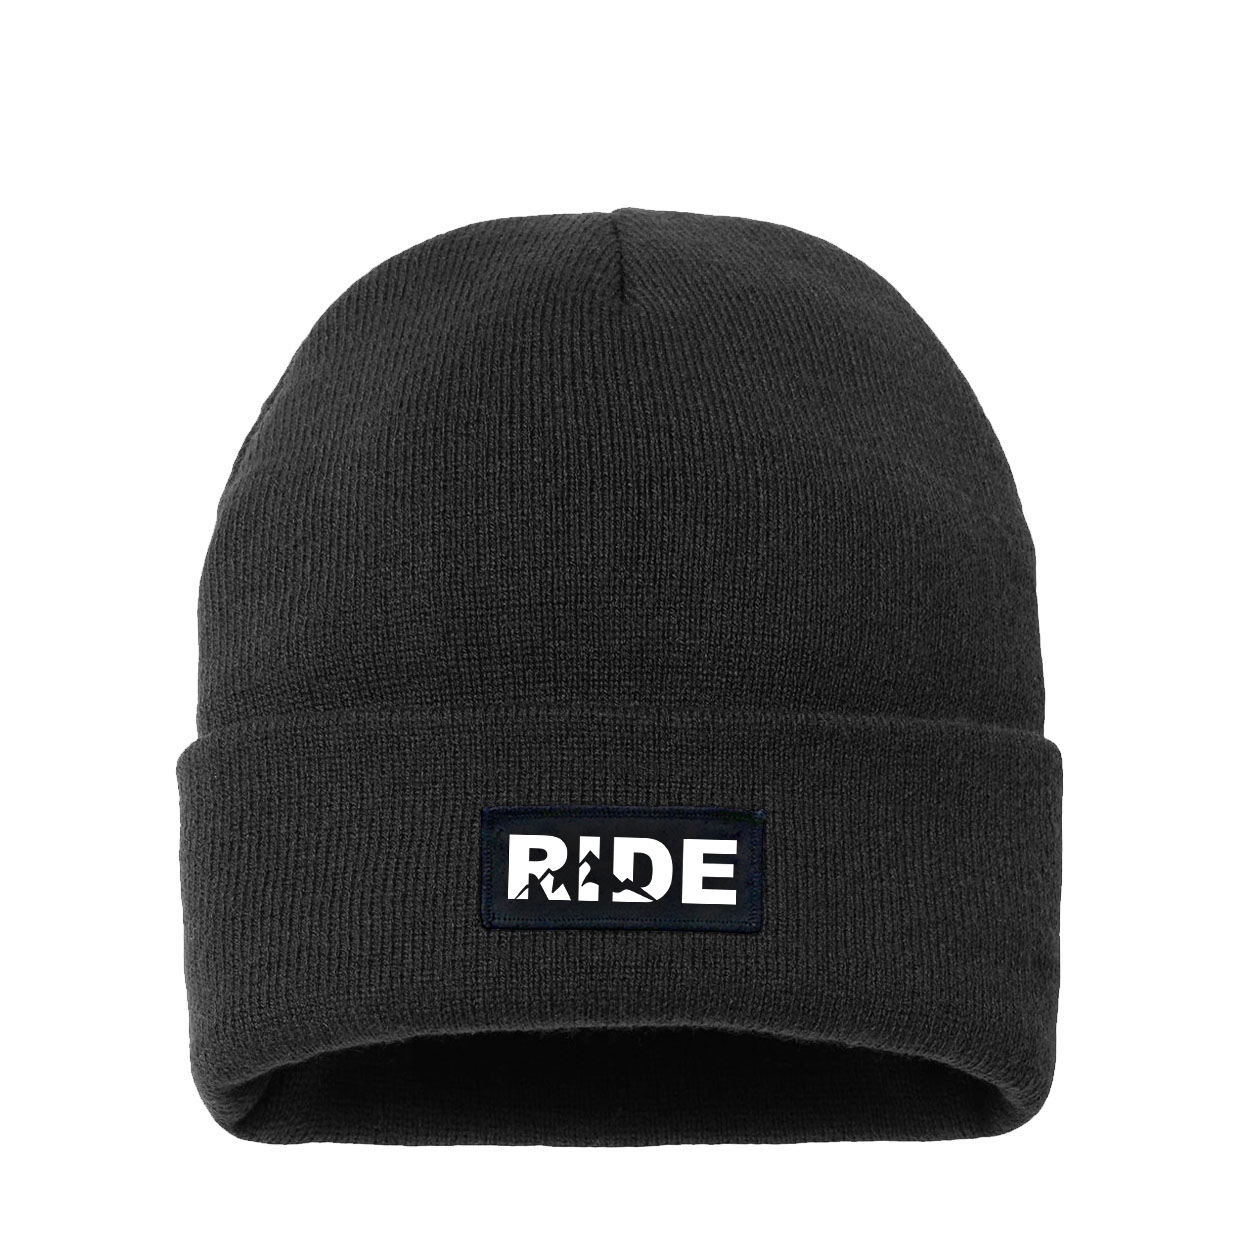 Ride Mountain Logo Night Out Woven Patch Night Out Sherpa Lined Cuffed Beanie Black